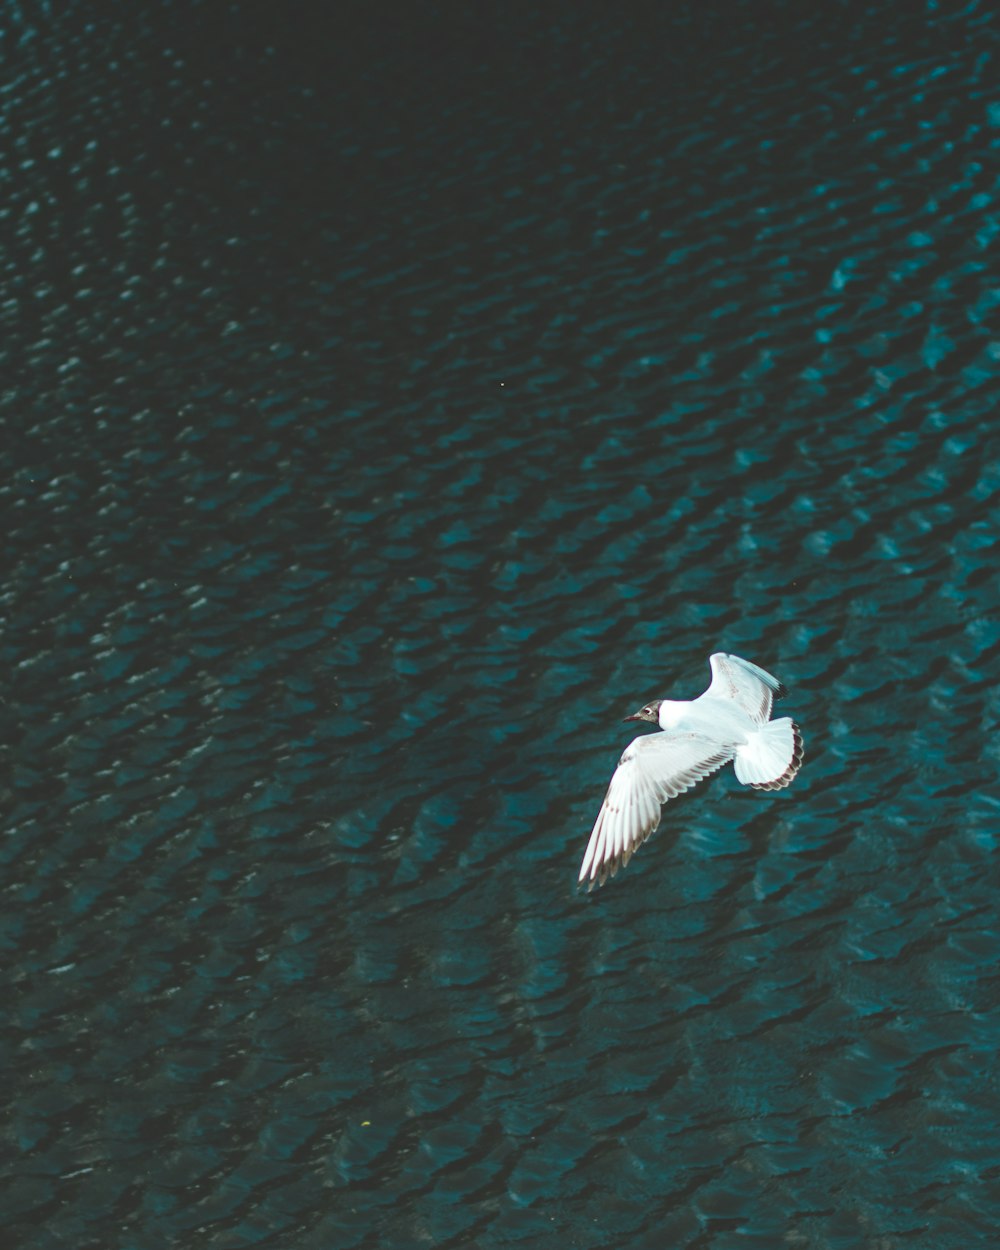 white bird flying above body of water at daytime